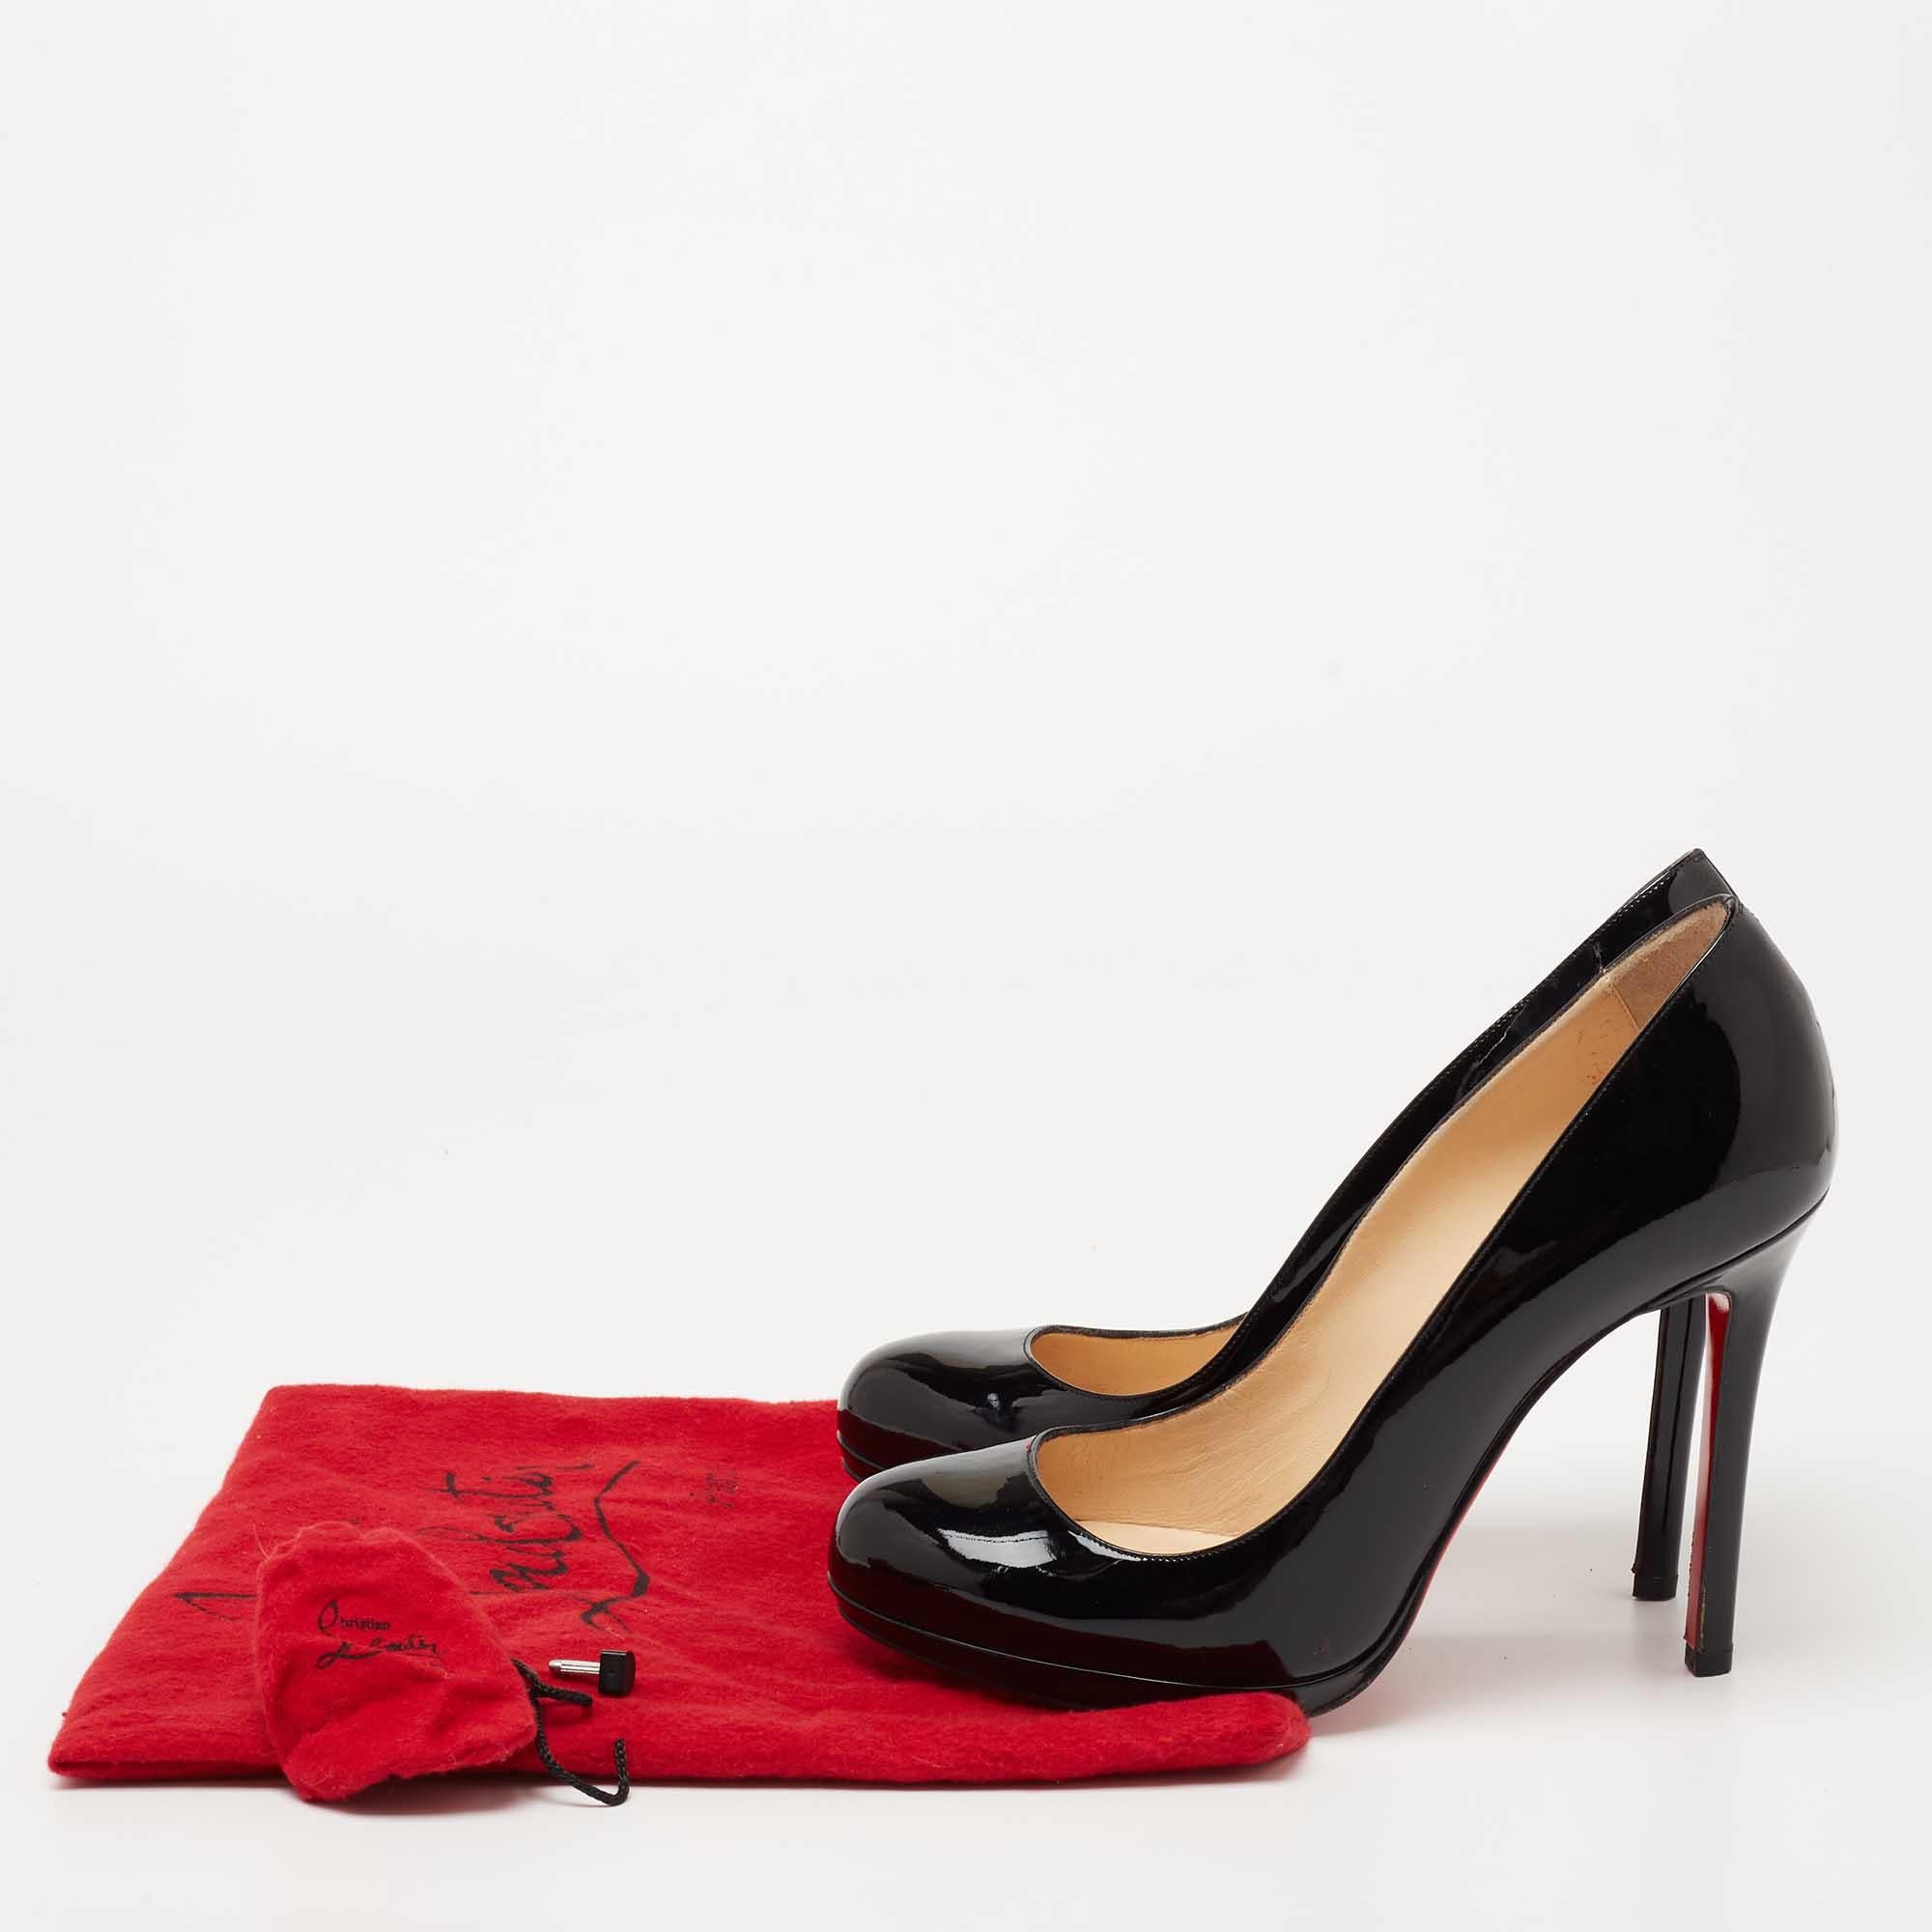 Christian Louboutin yet again brings a stunning set of pumps that makes us marvel at its beauty and craftsmanship. With the curvaceous arch that ultimately forms into a round-toe silhouette, they will give an illusion of elongated feet to the